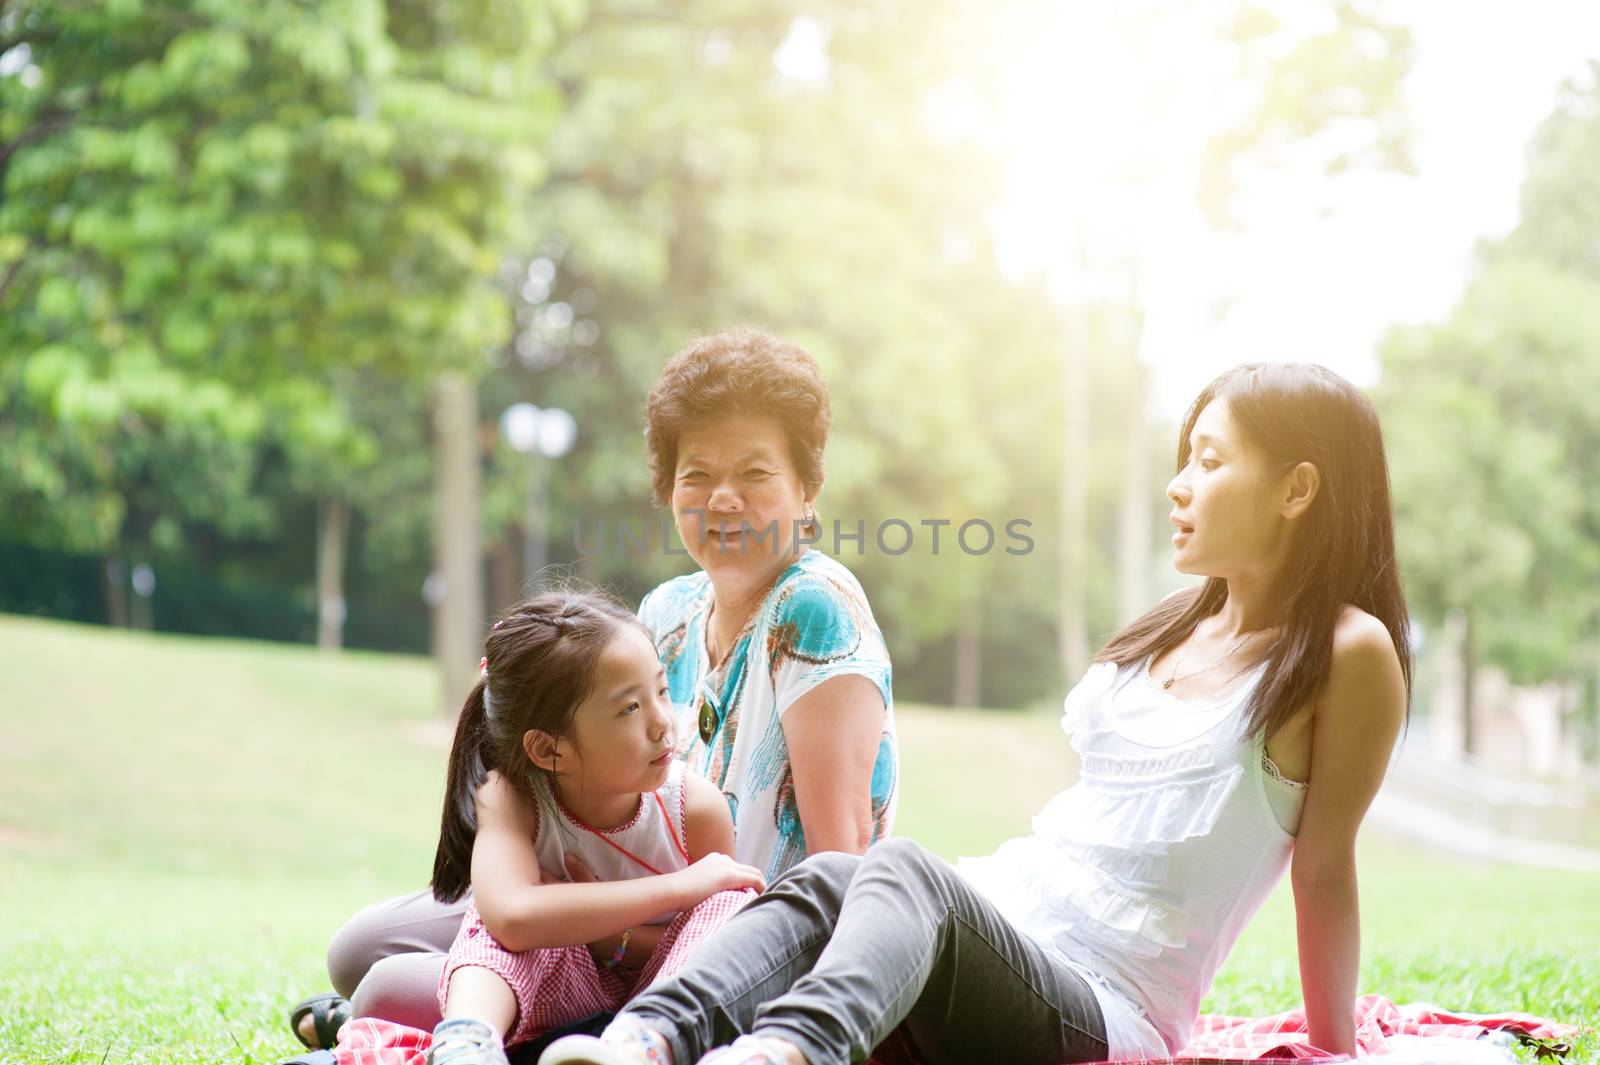 Candid portrait of multi generation Asian family at nature park. Grandmother, mother and grandchild outdoor fun. Morning sun flare background.